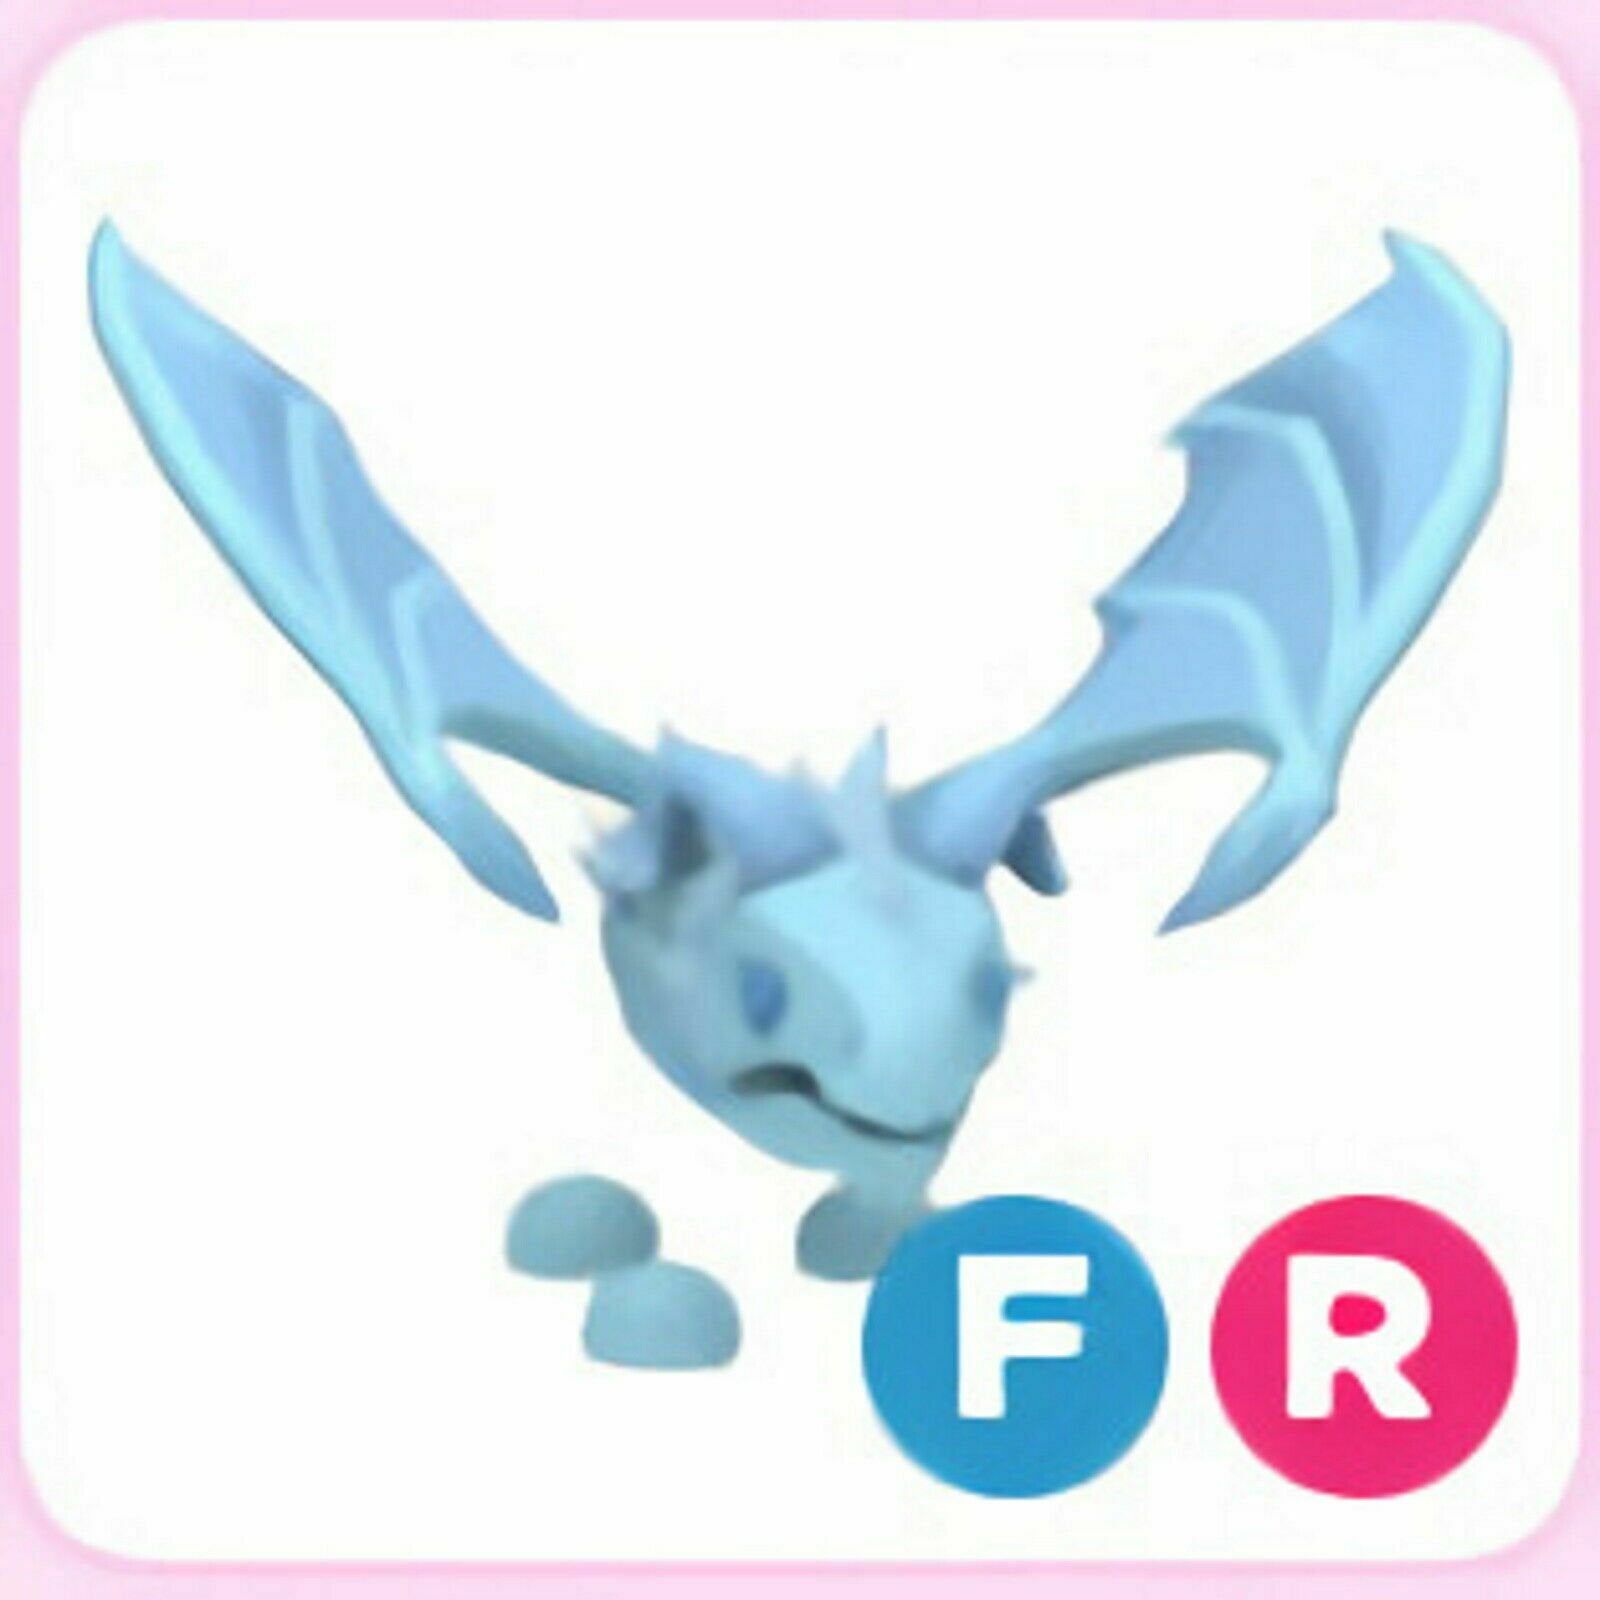 FR Frost Dragon Adopt Me Roblox Game FREE delivery USA digital pet freebie with purchase of art print Fl. Pet adoption party, Pet dragon, Pet adoption certificate